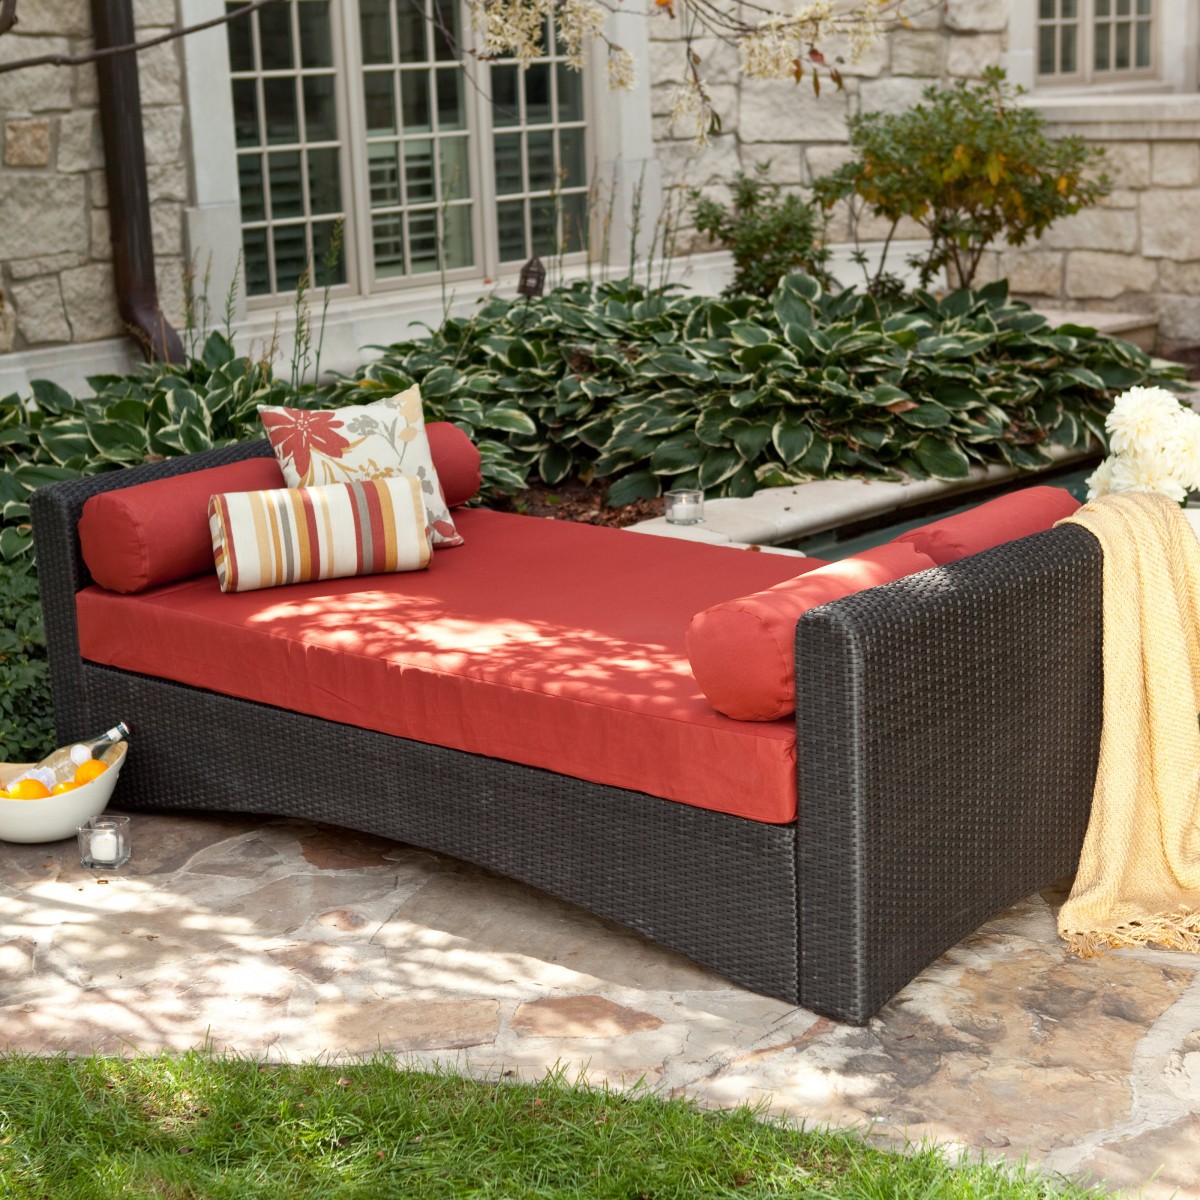 Stylish Outdoor Daybeds For Relaxation